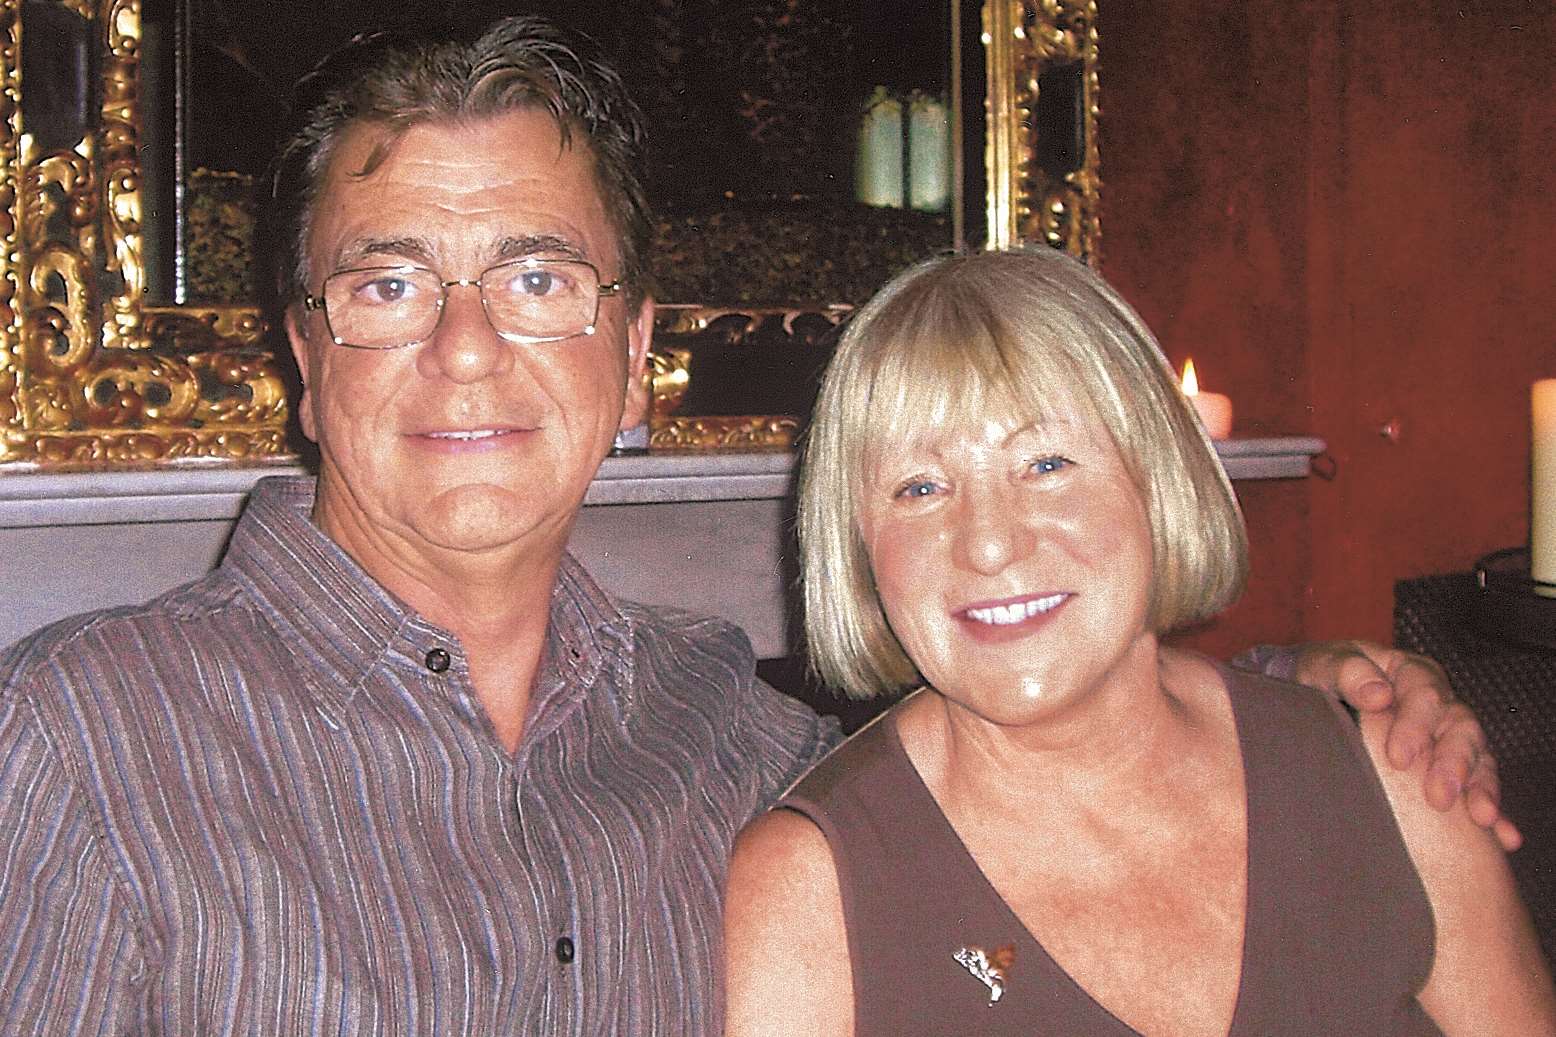 James Villas founder James Needham and his wife Shelagh